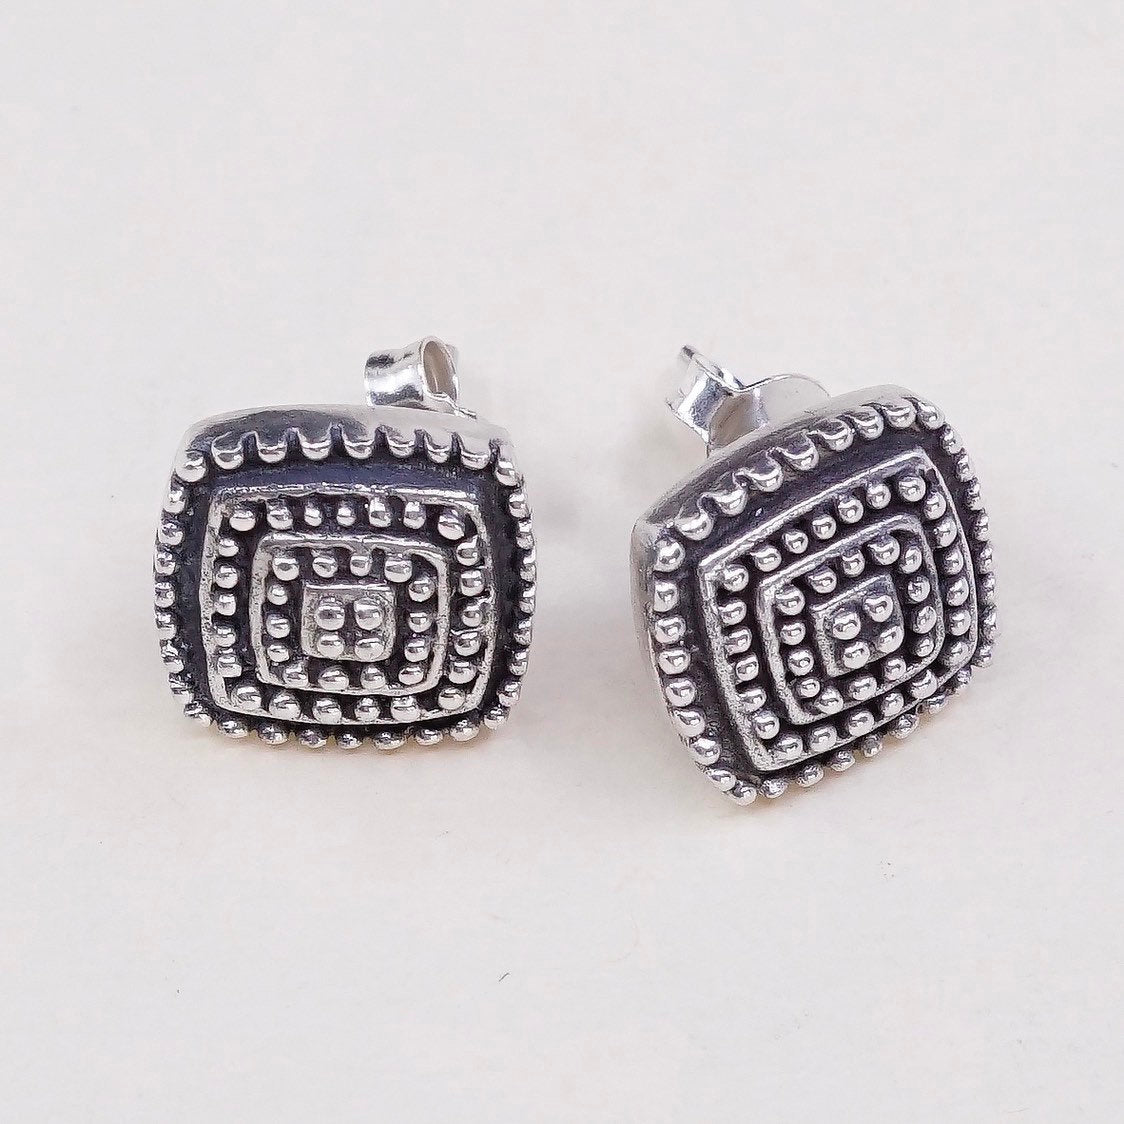 vtg sterling silver handmade earrings, solid 925 silver studs with beads